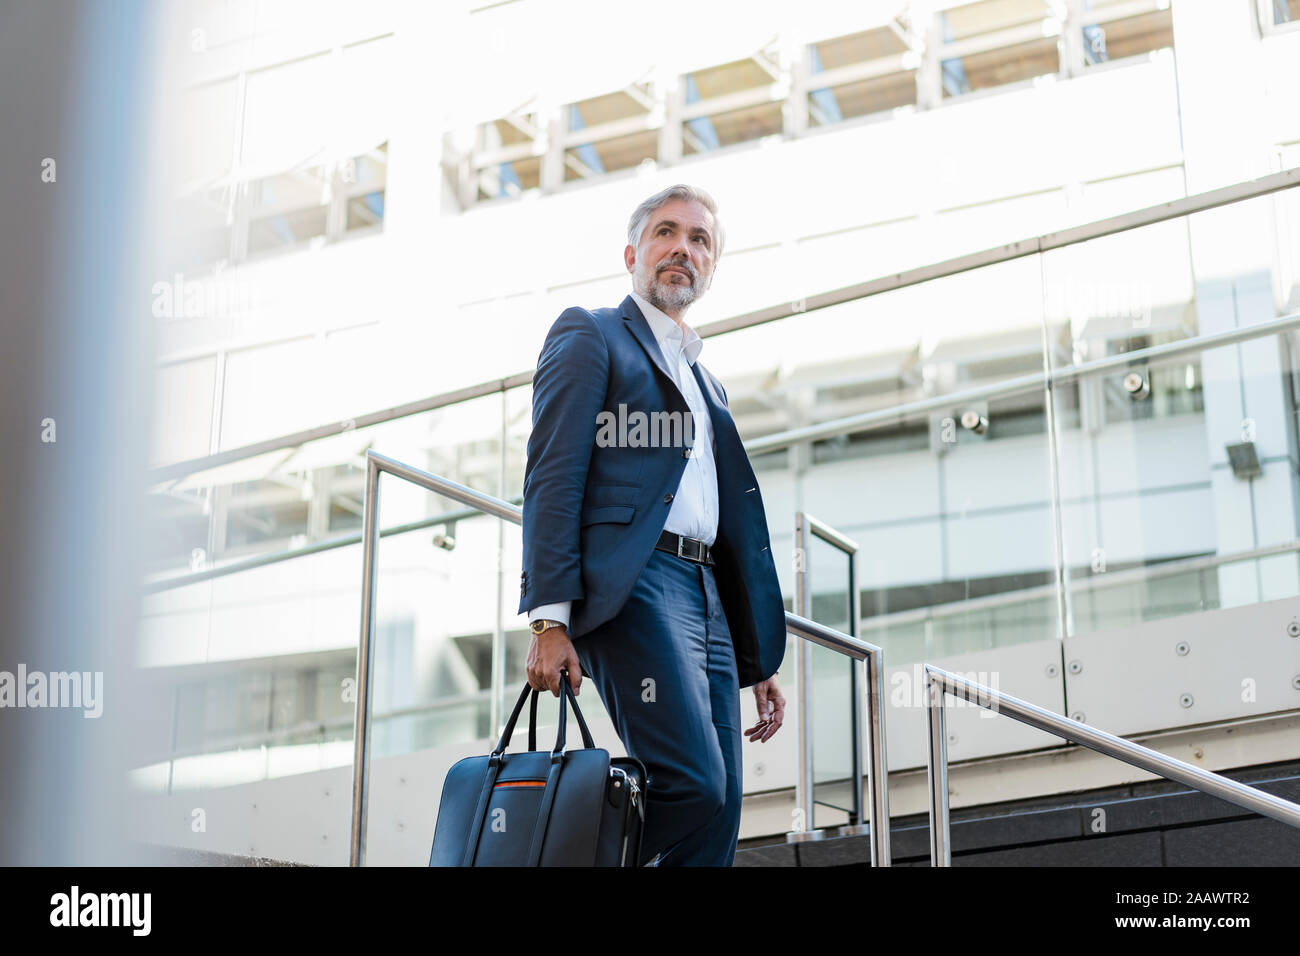 Mature businessman holding bag walking down stairs in the city Stock Photo